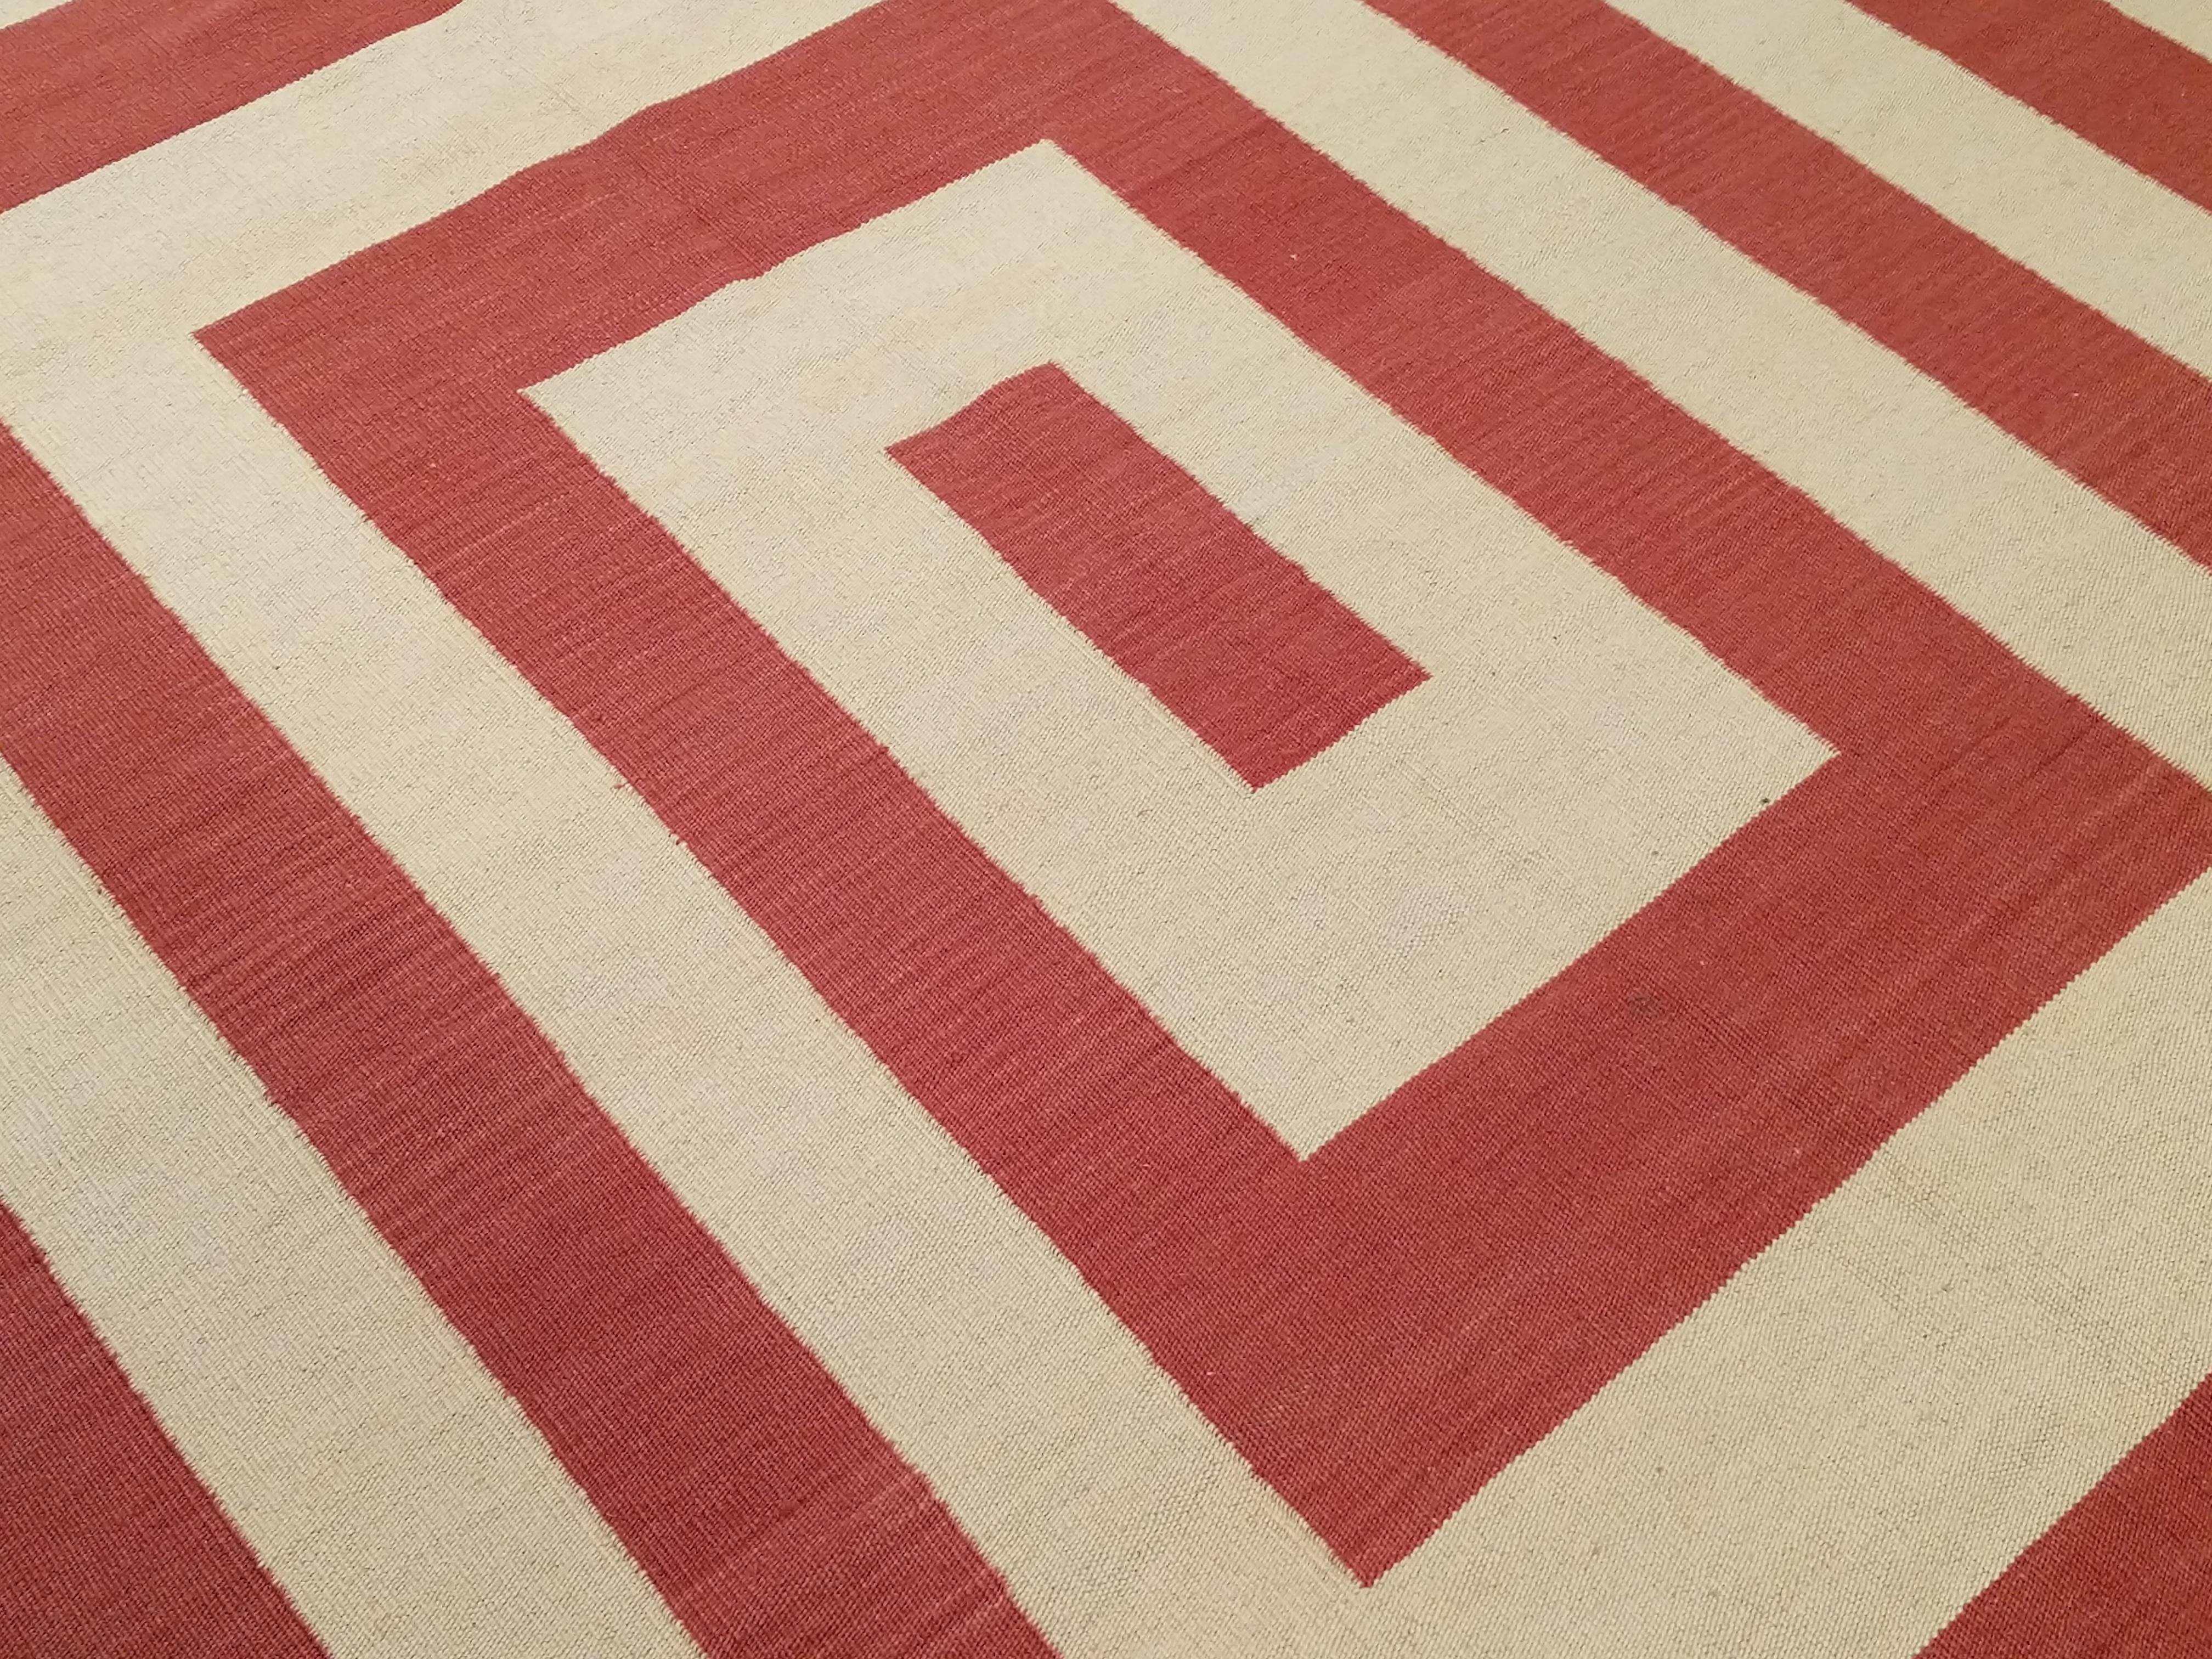 Inspired by the highly visual patterns developed by Modernist movements such as Op-Art, this wool flat-weave has a pattern of red concentric rectangles on an ivory background. Part of our collections of contemporary kilims, this design can be